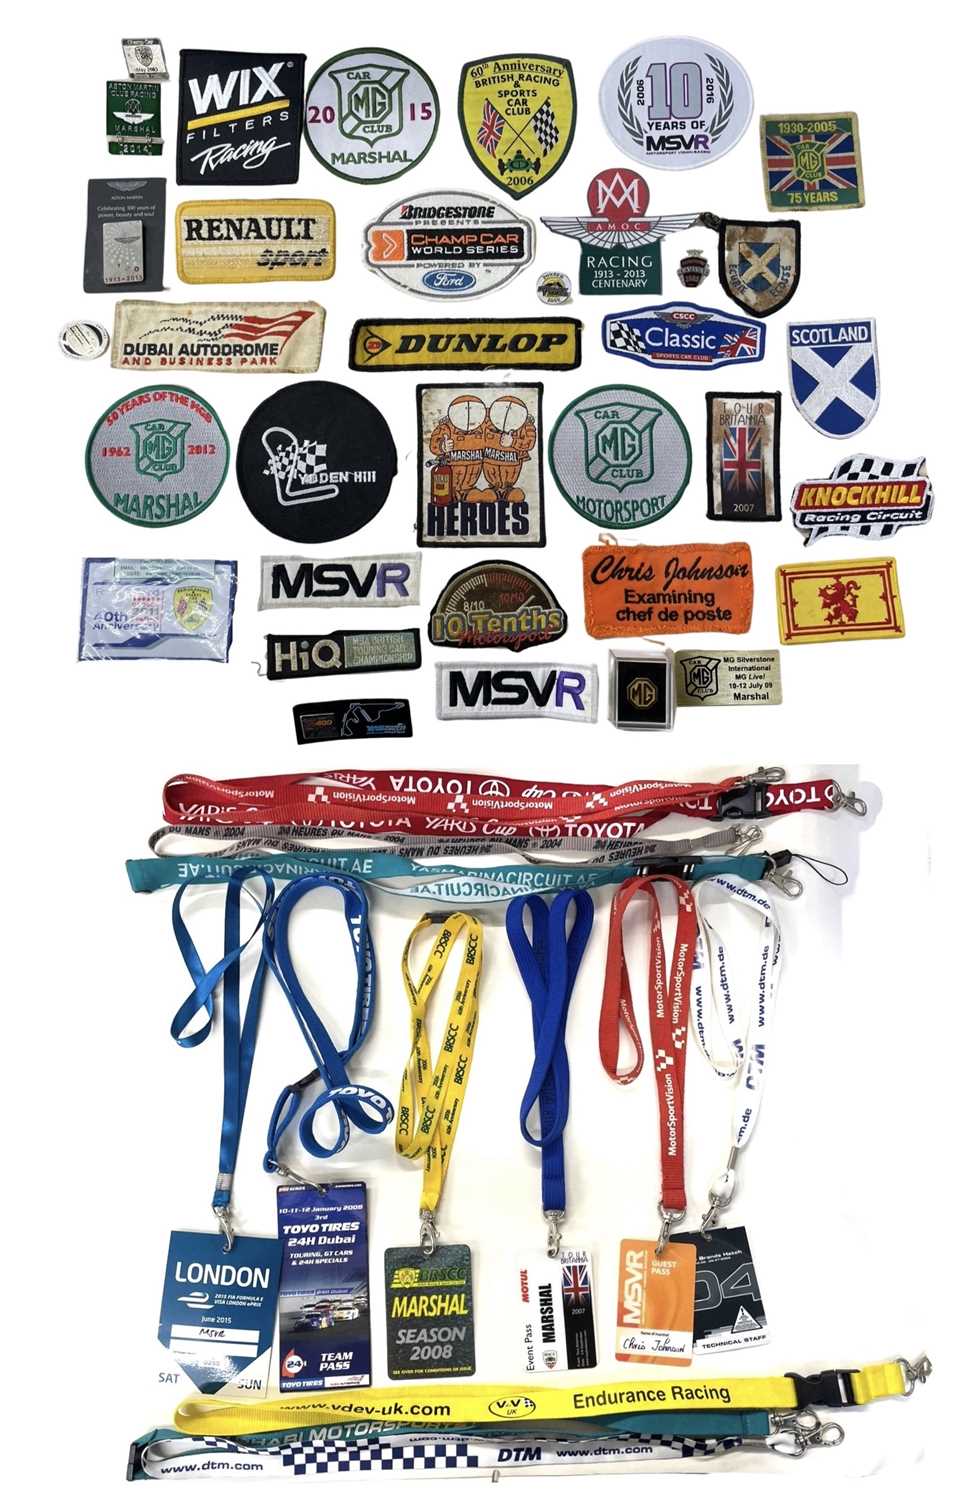 A collection of vintage British Racing patches and pin badges, together with a collection of British